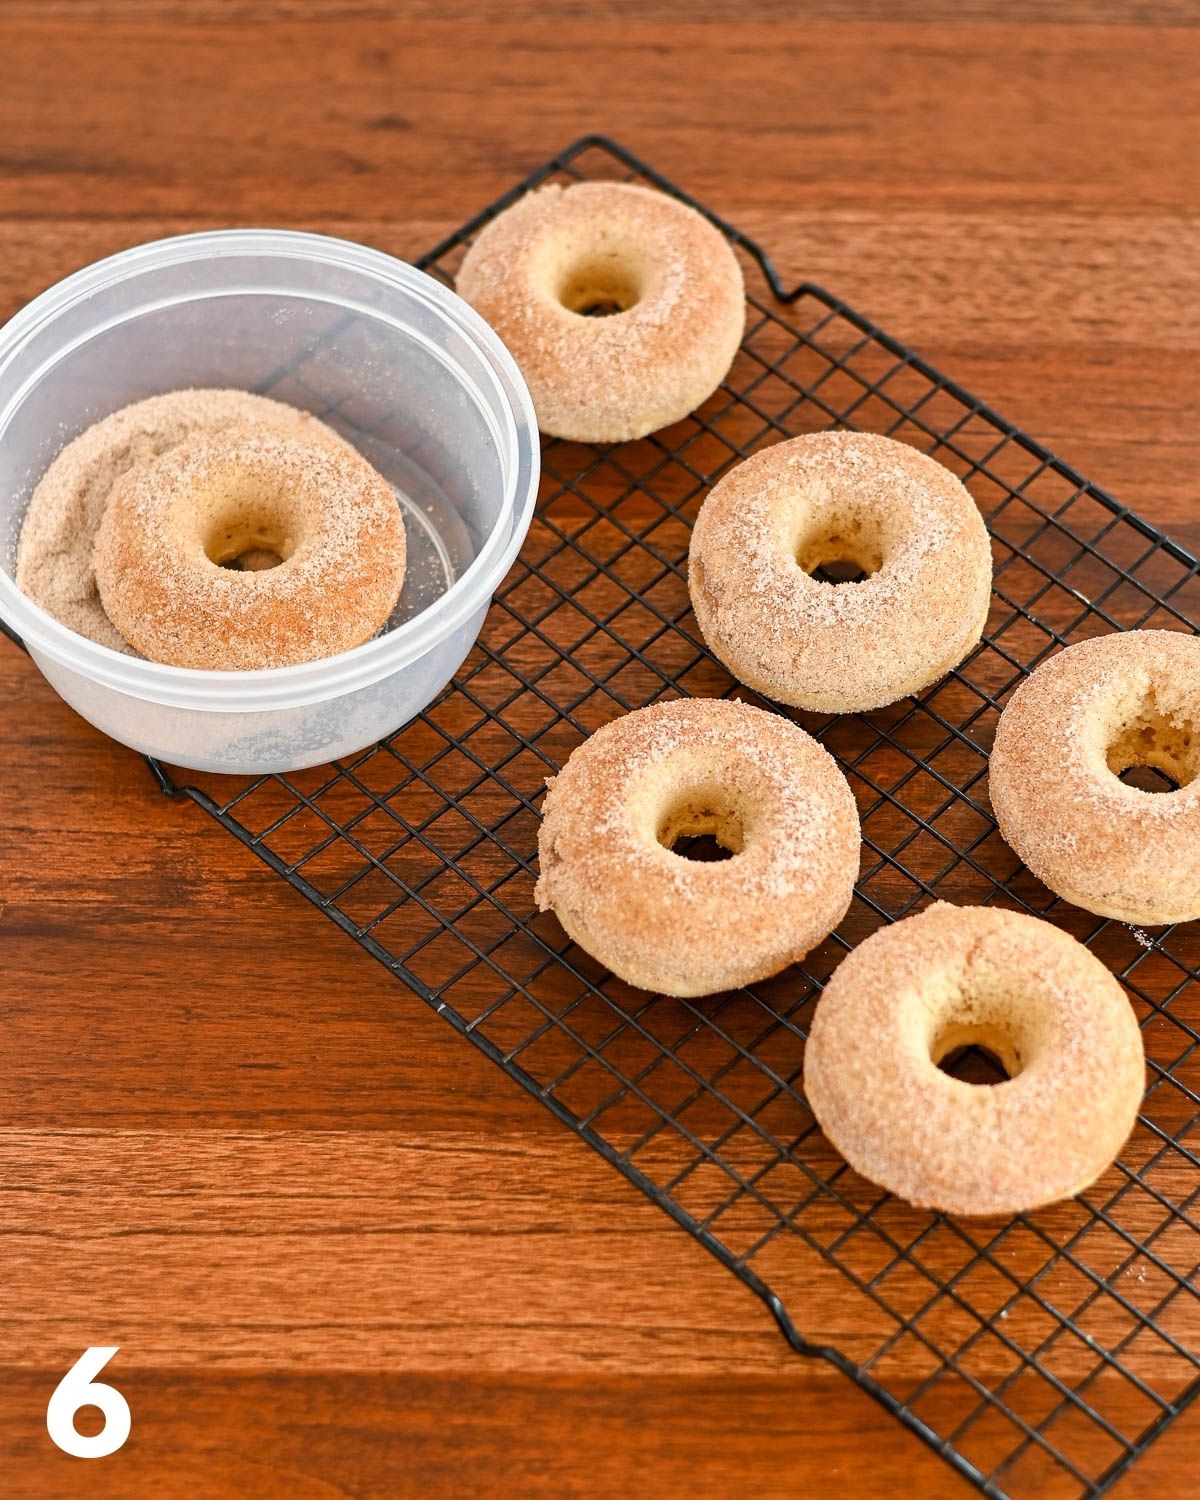 Baked donuts being covers with cinnamon sugar. 